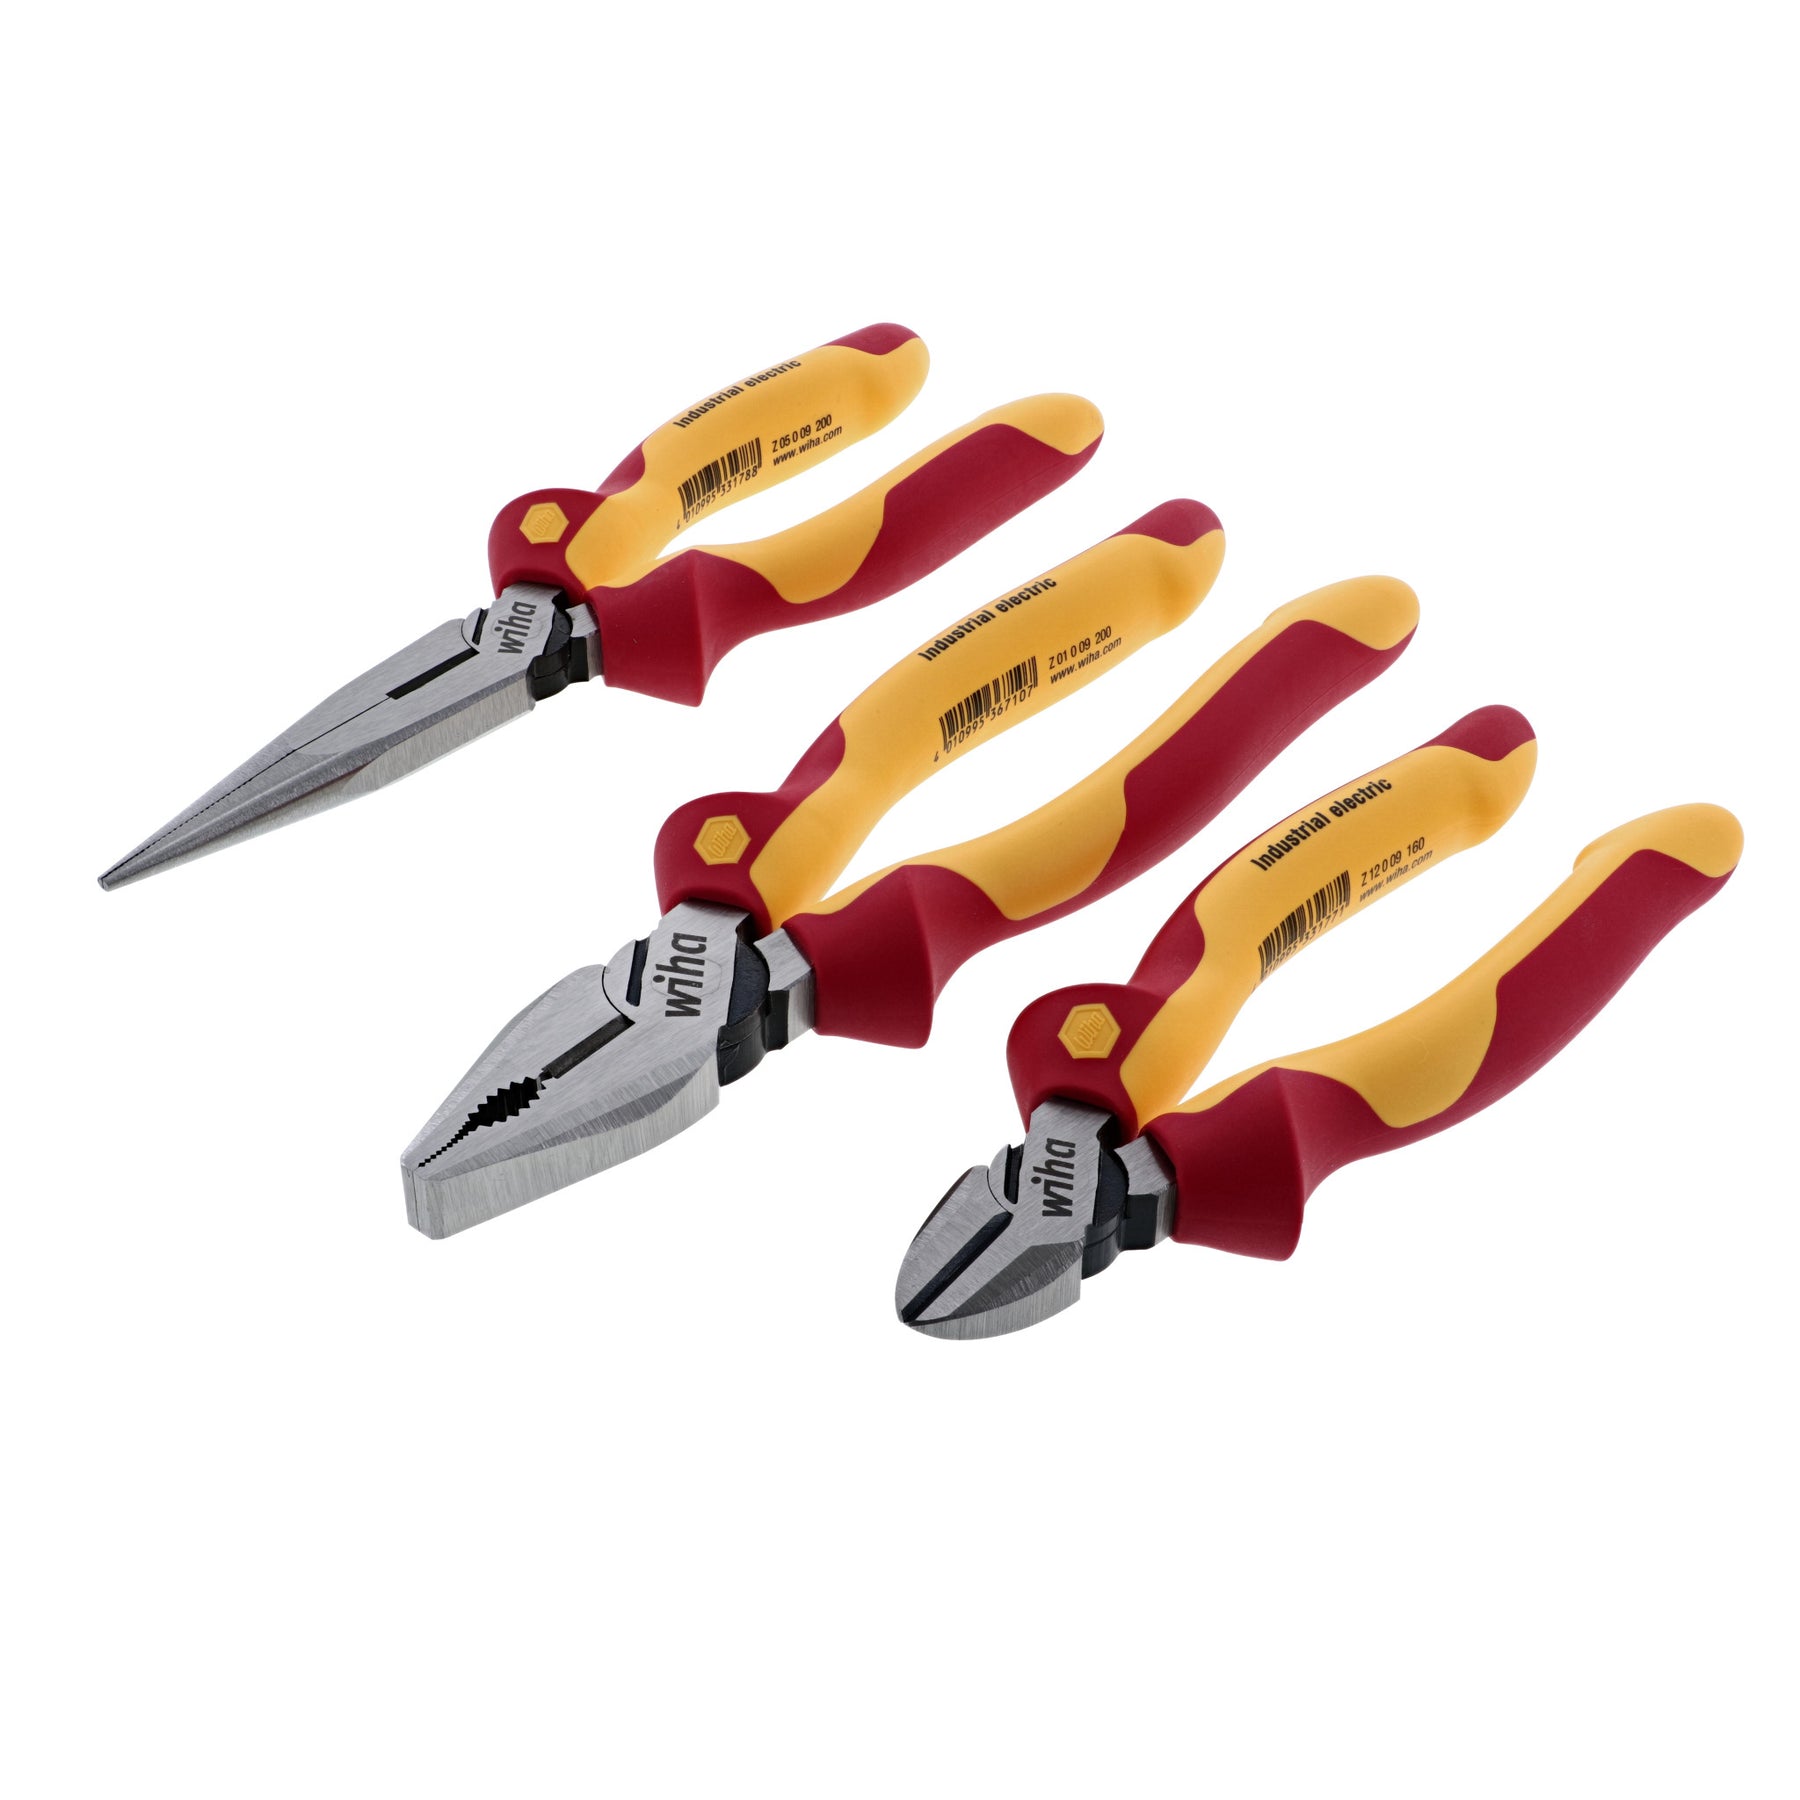 3 Piece Insulated Pliers and Cutters Set